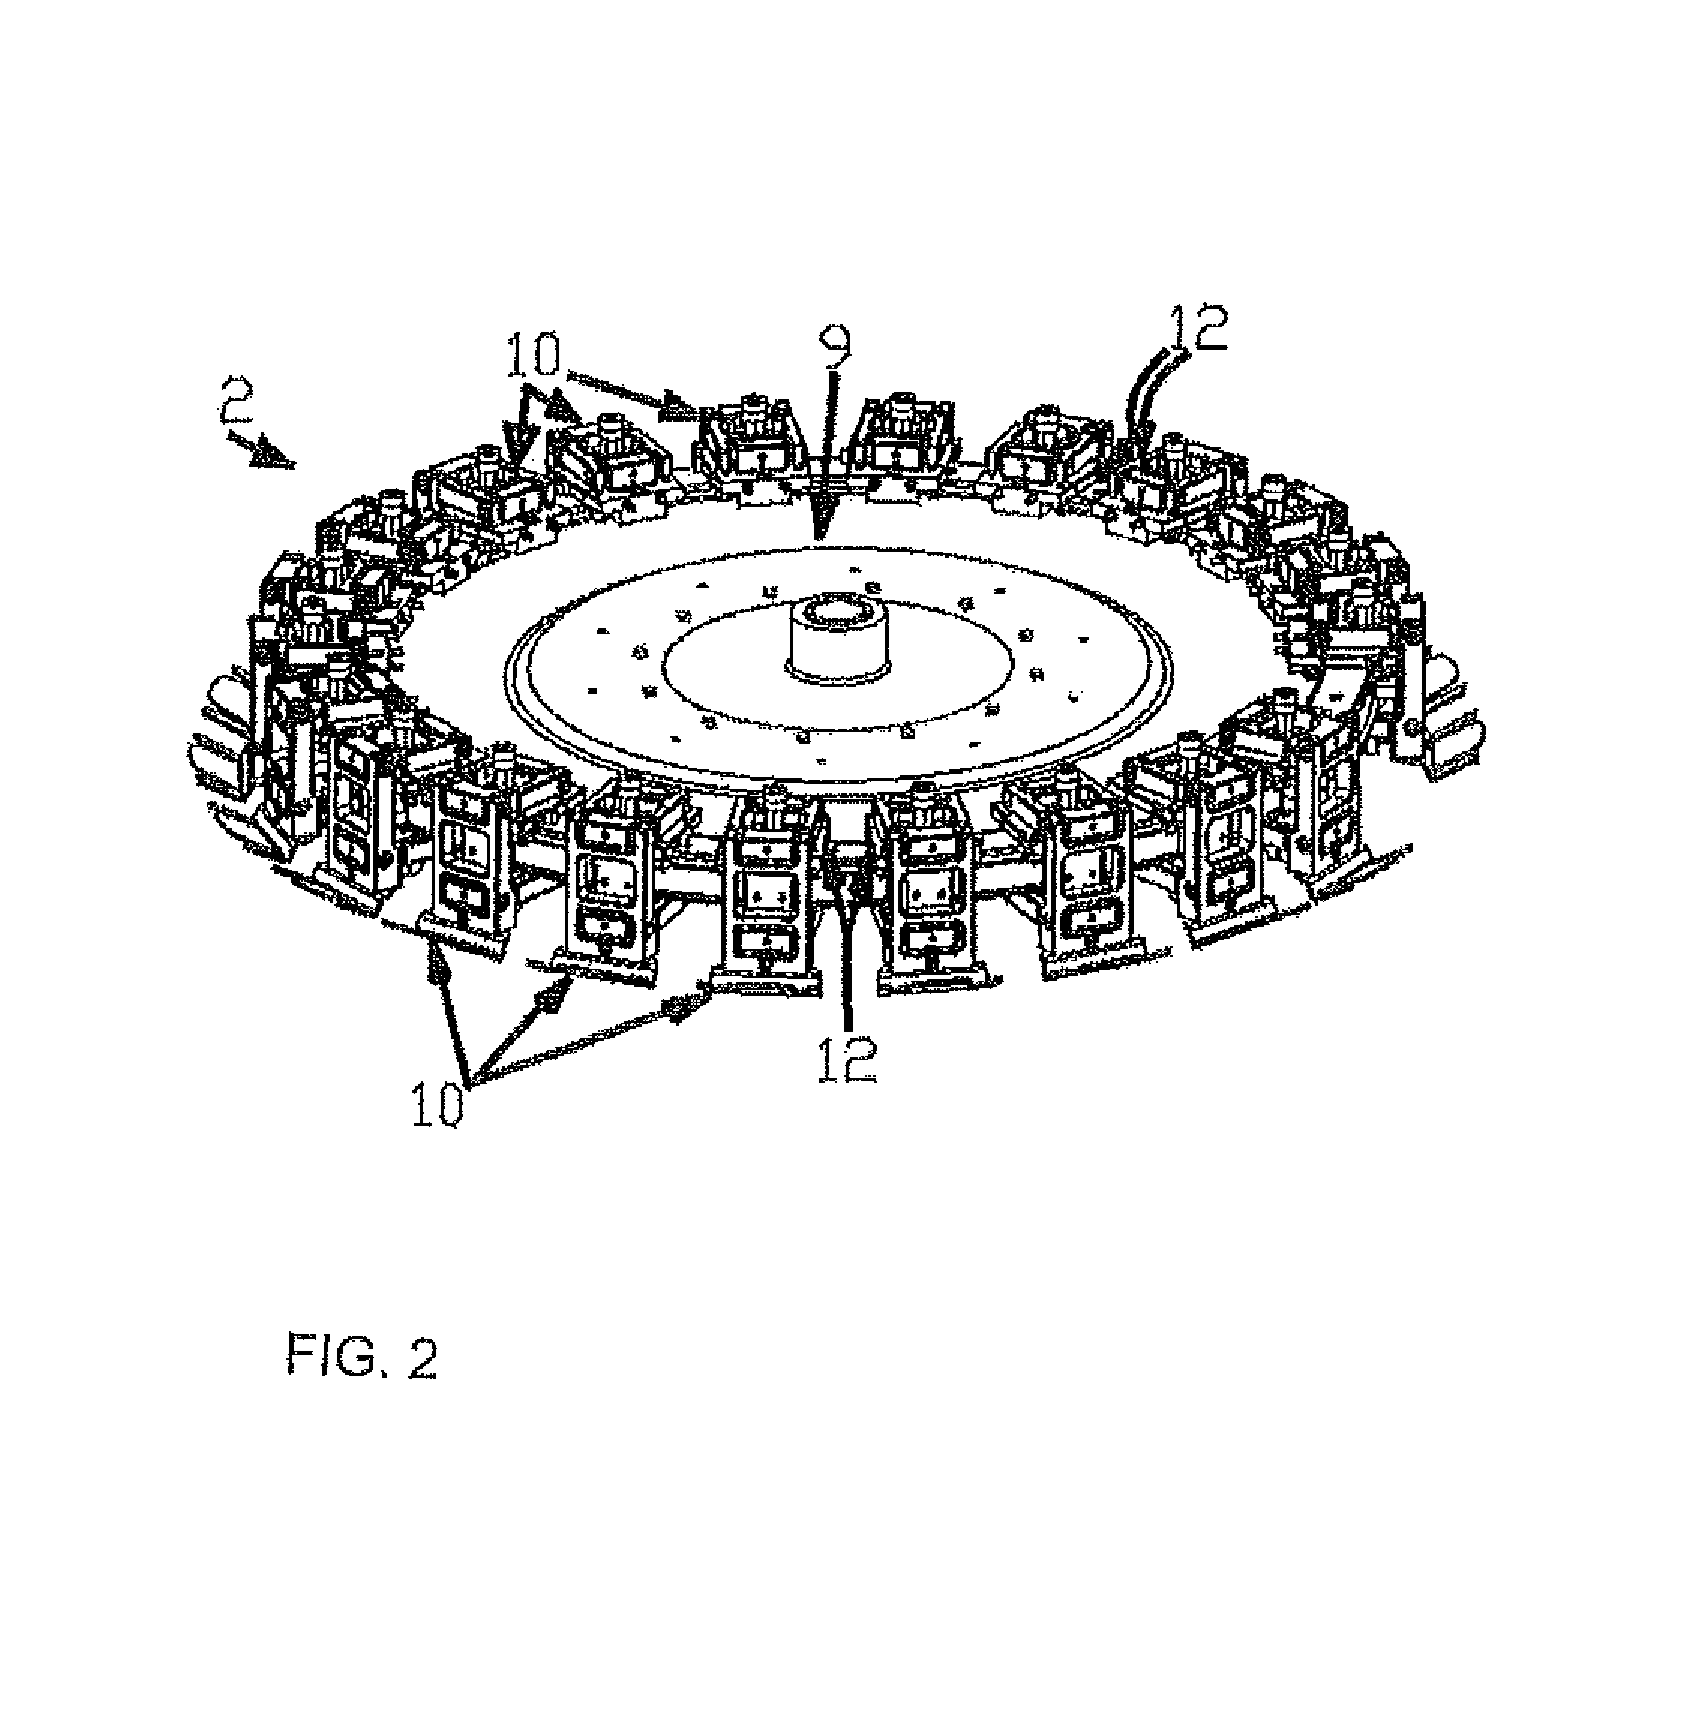 Poultry processing apparatus having one or more transfer units